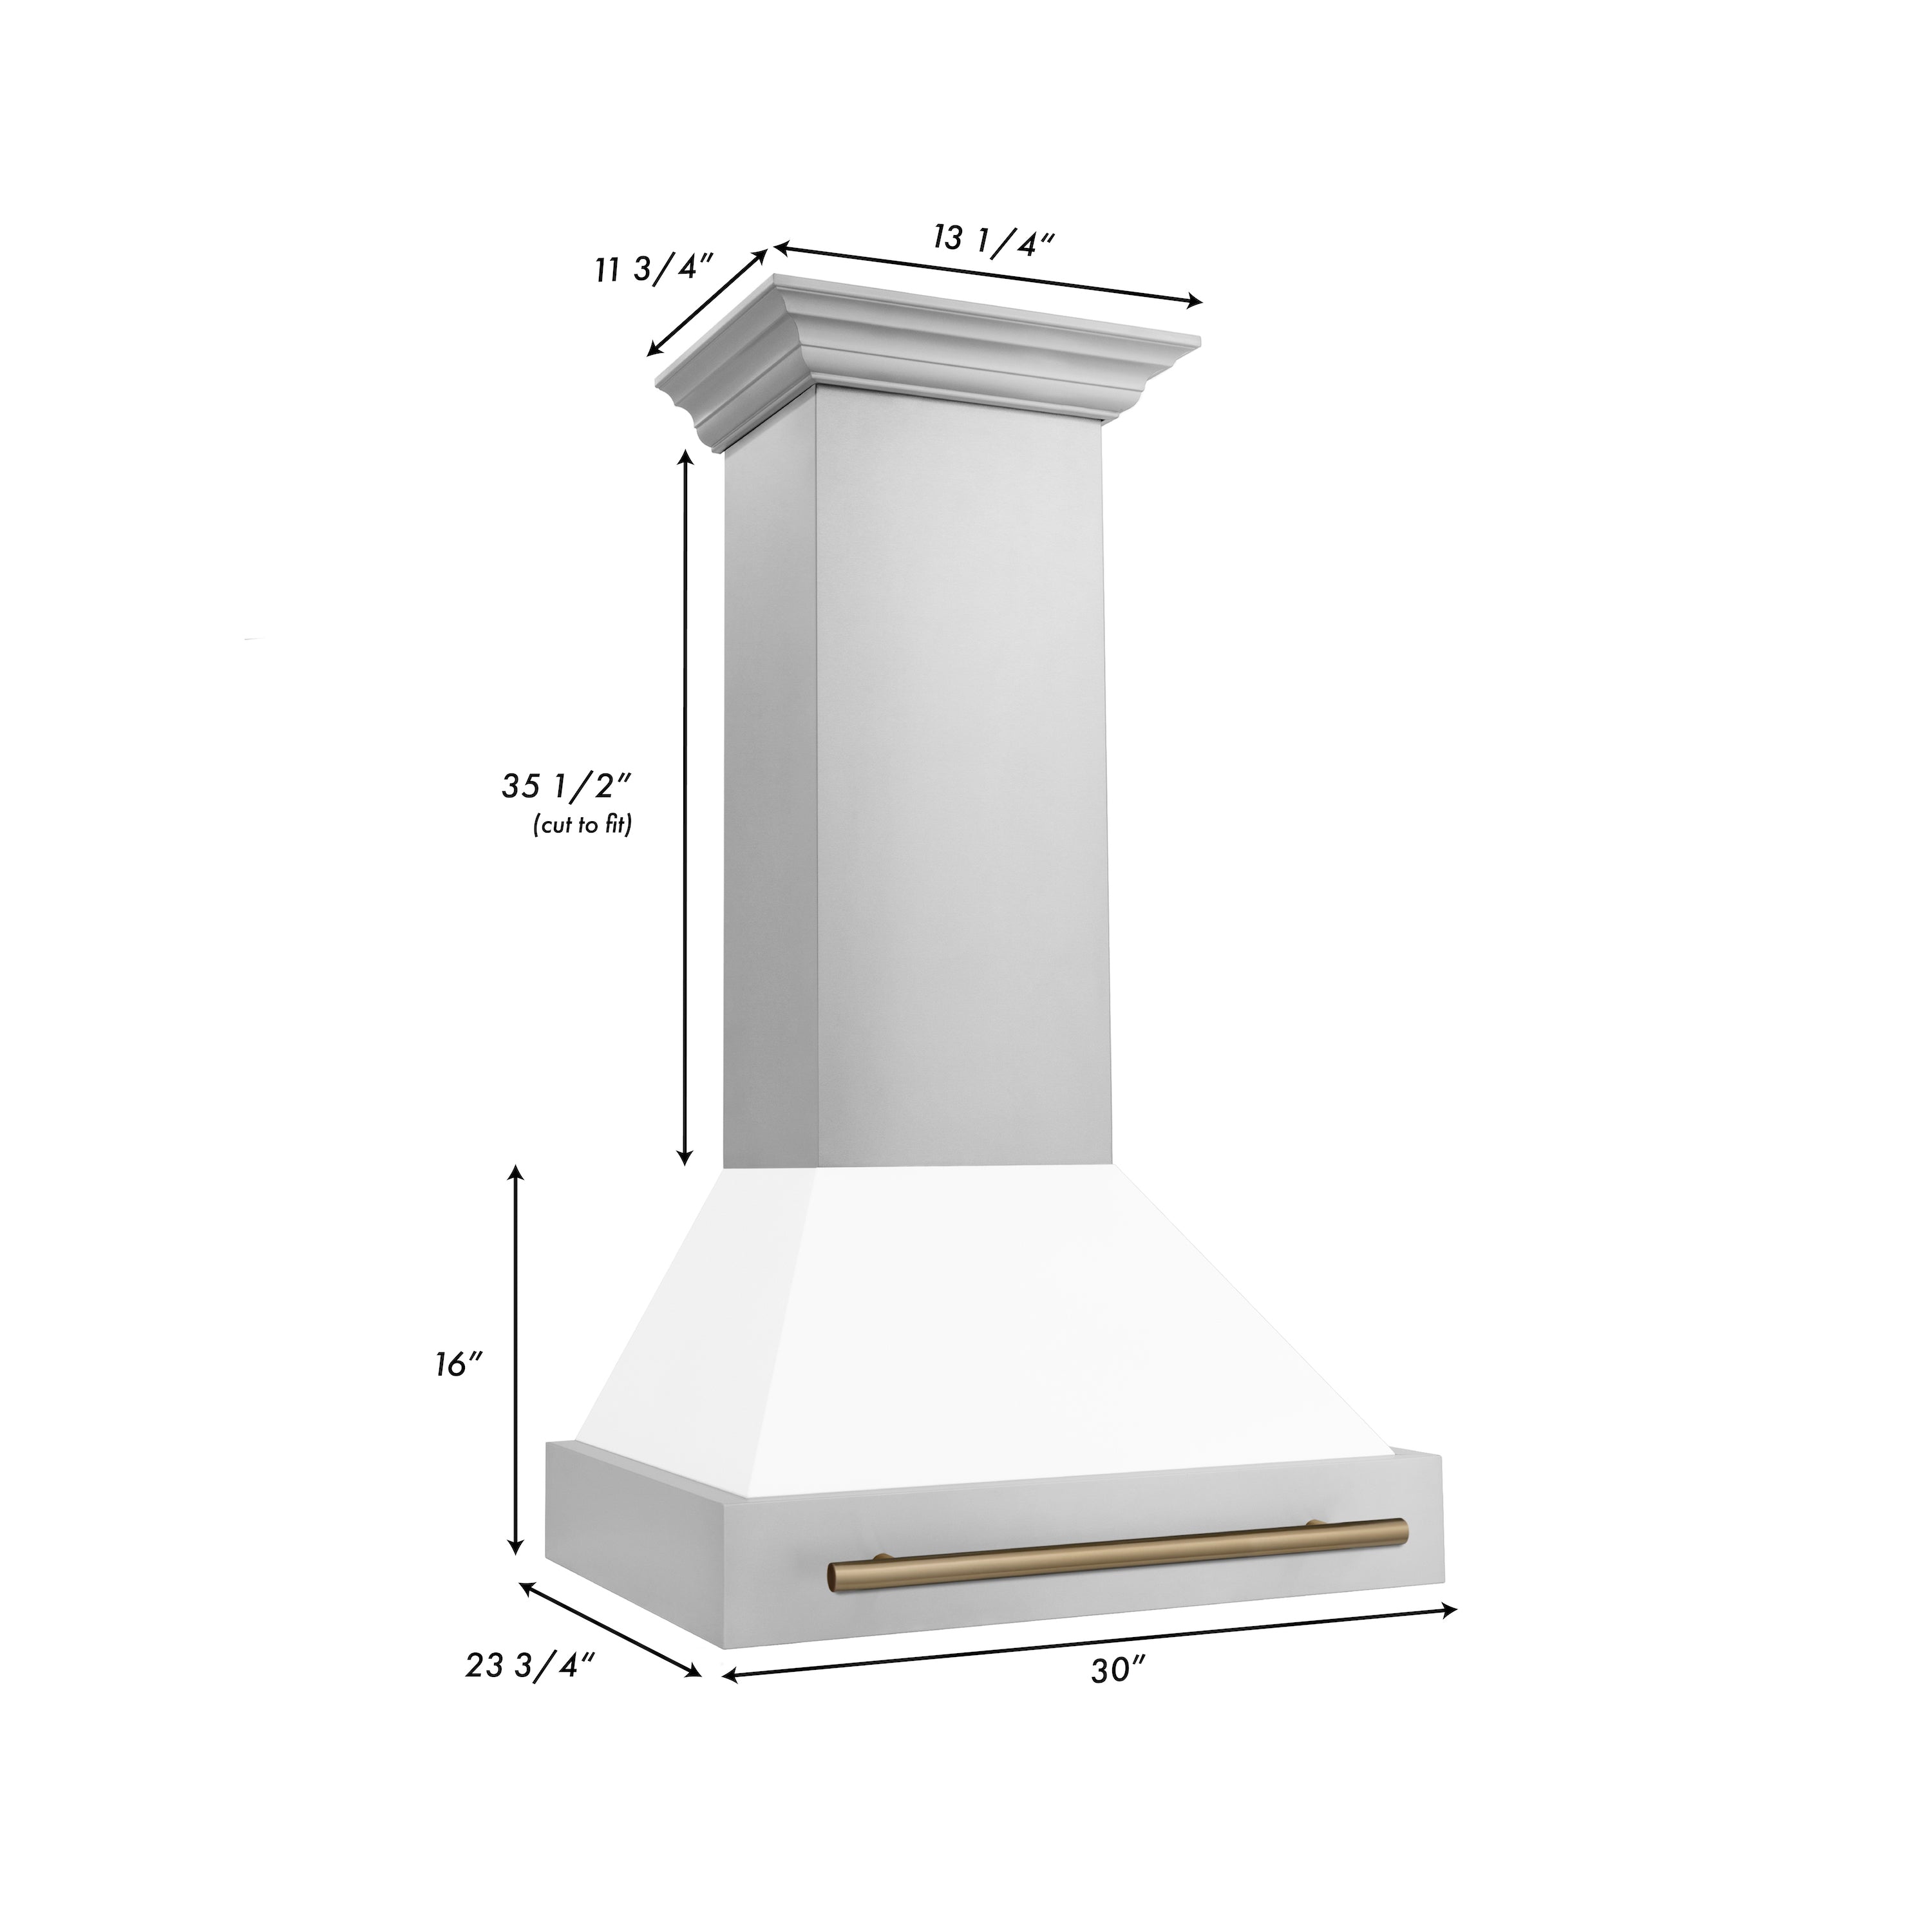 30" ZLINE Autograph Edition Stainless Steel Range Hood with White Matte Shell and Champagne Bronze Handle (8654STZ-WM30-CB)